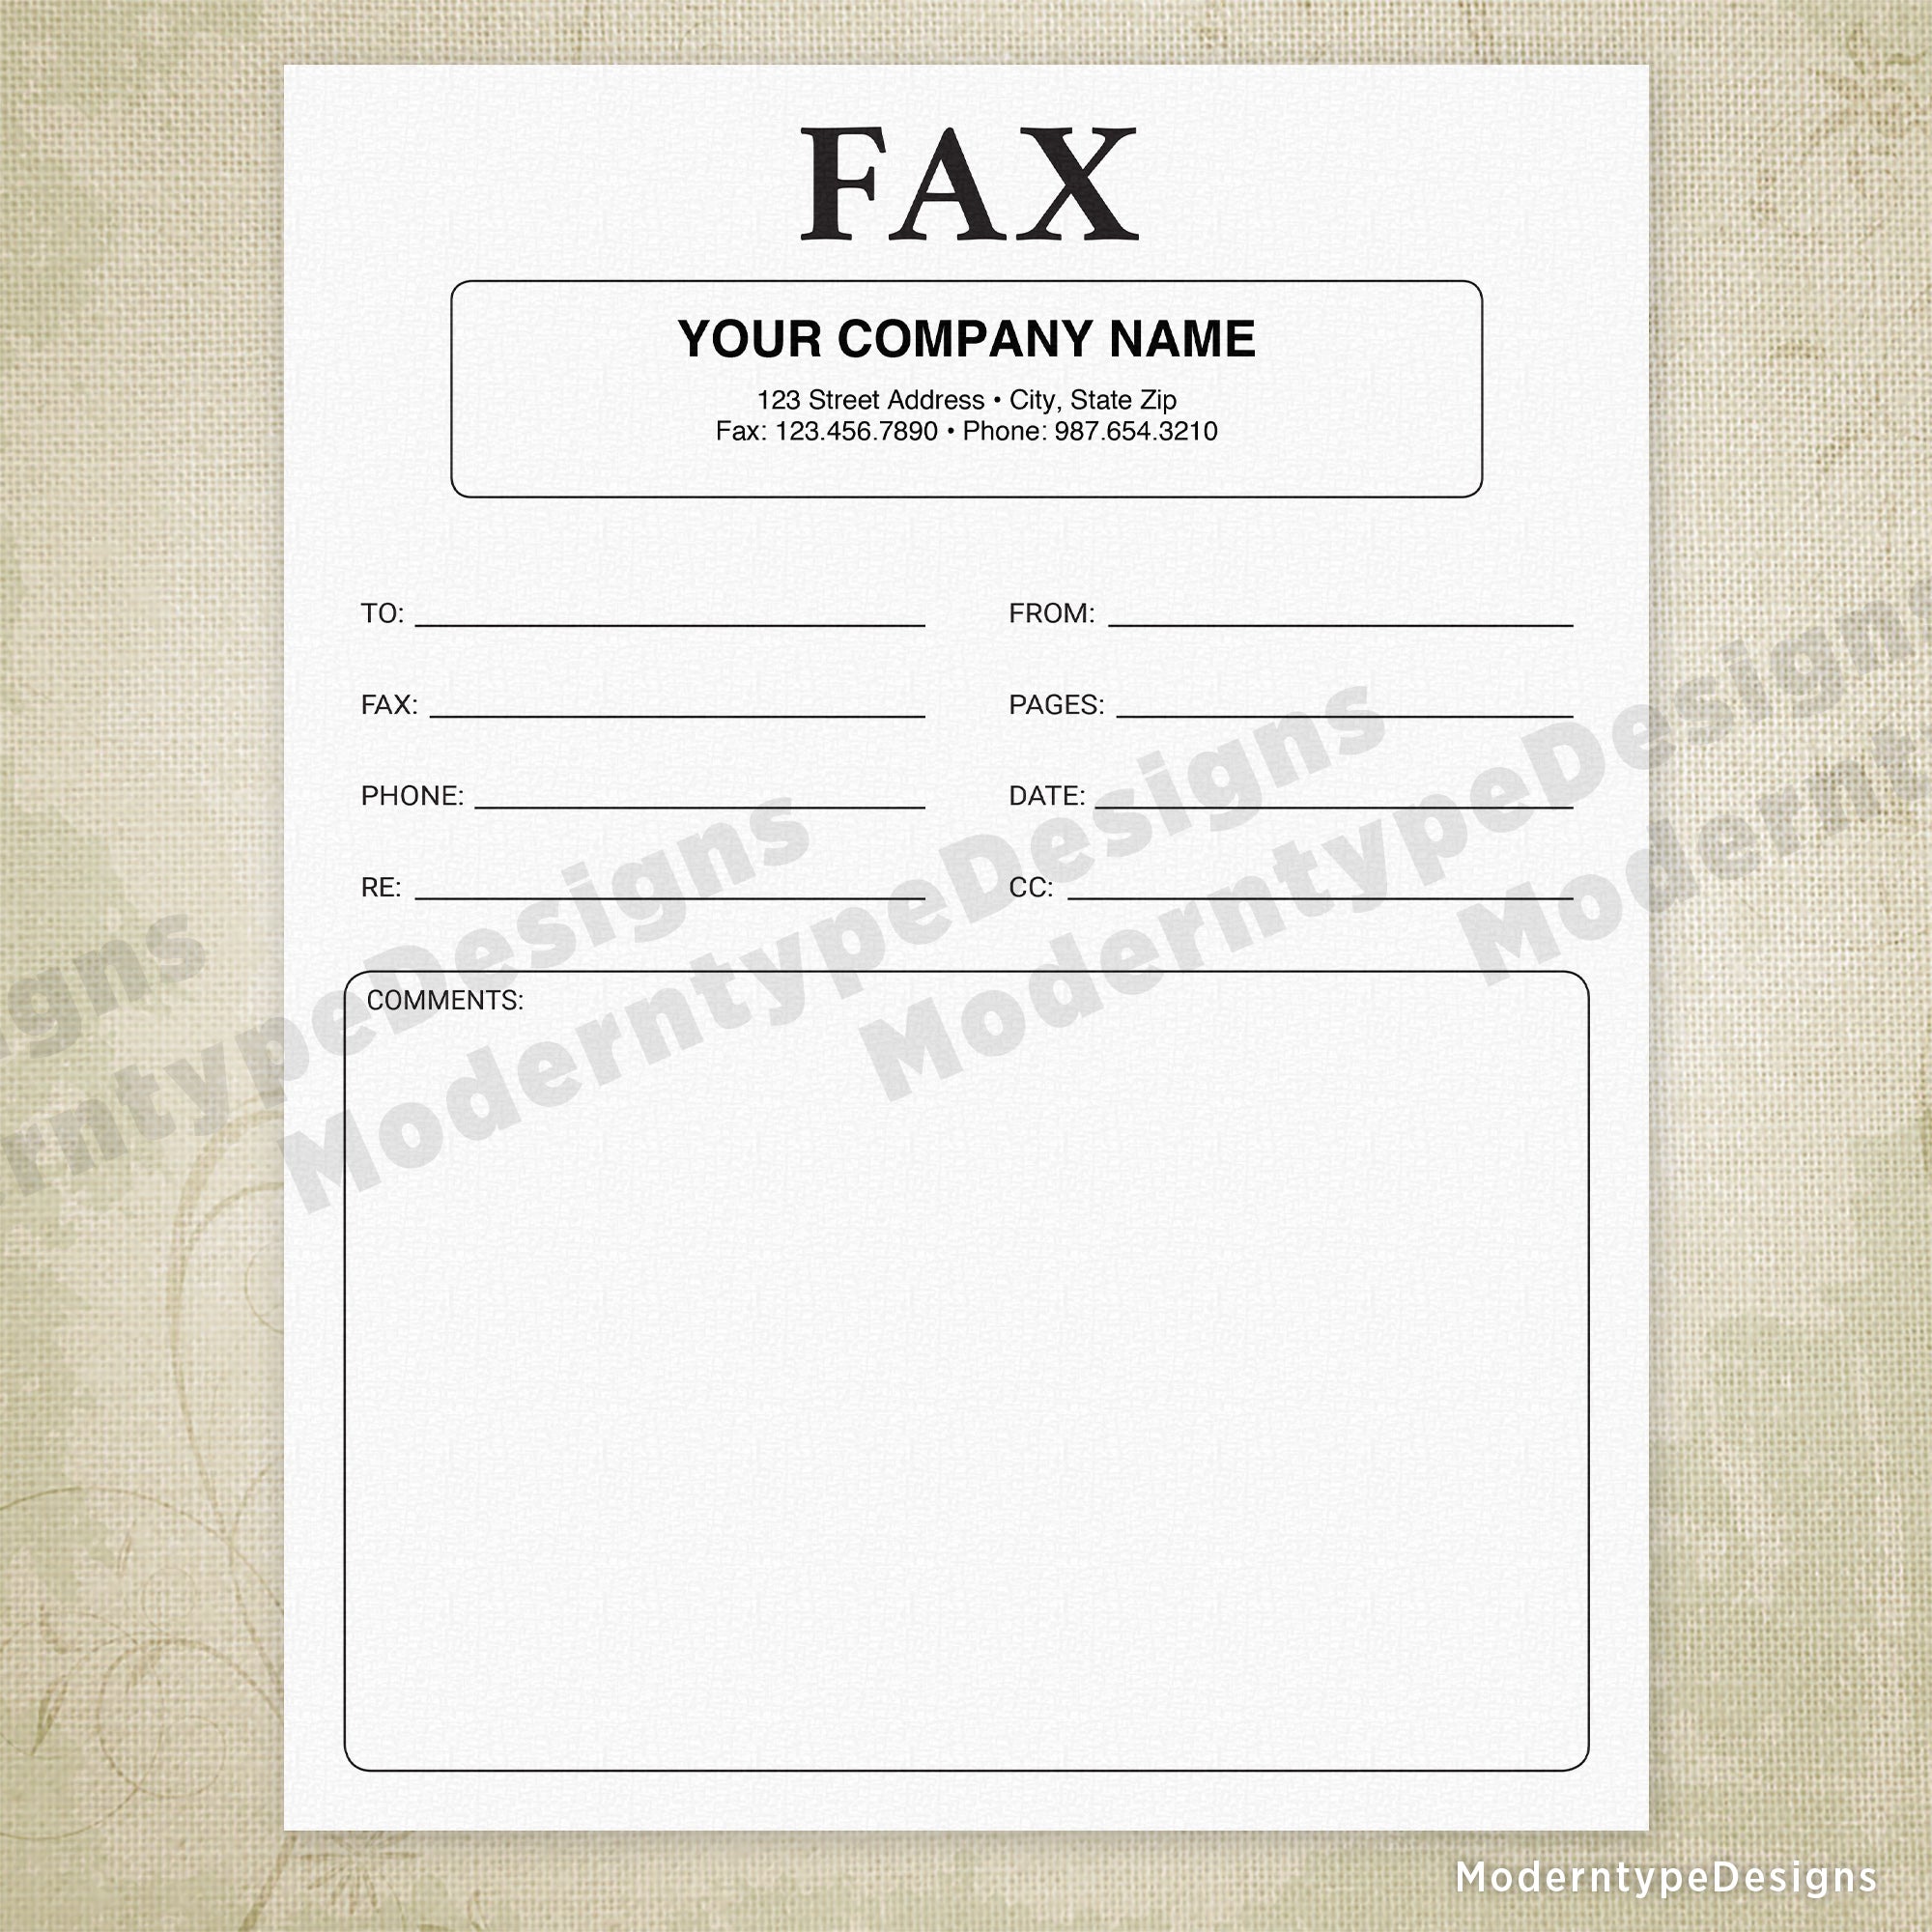 Fax Cover Sheet Printable Form, Personalized